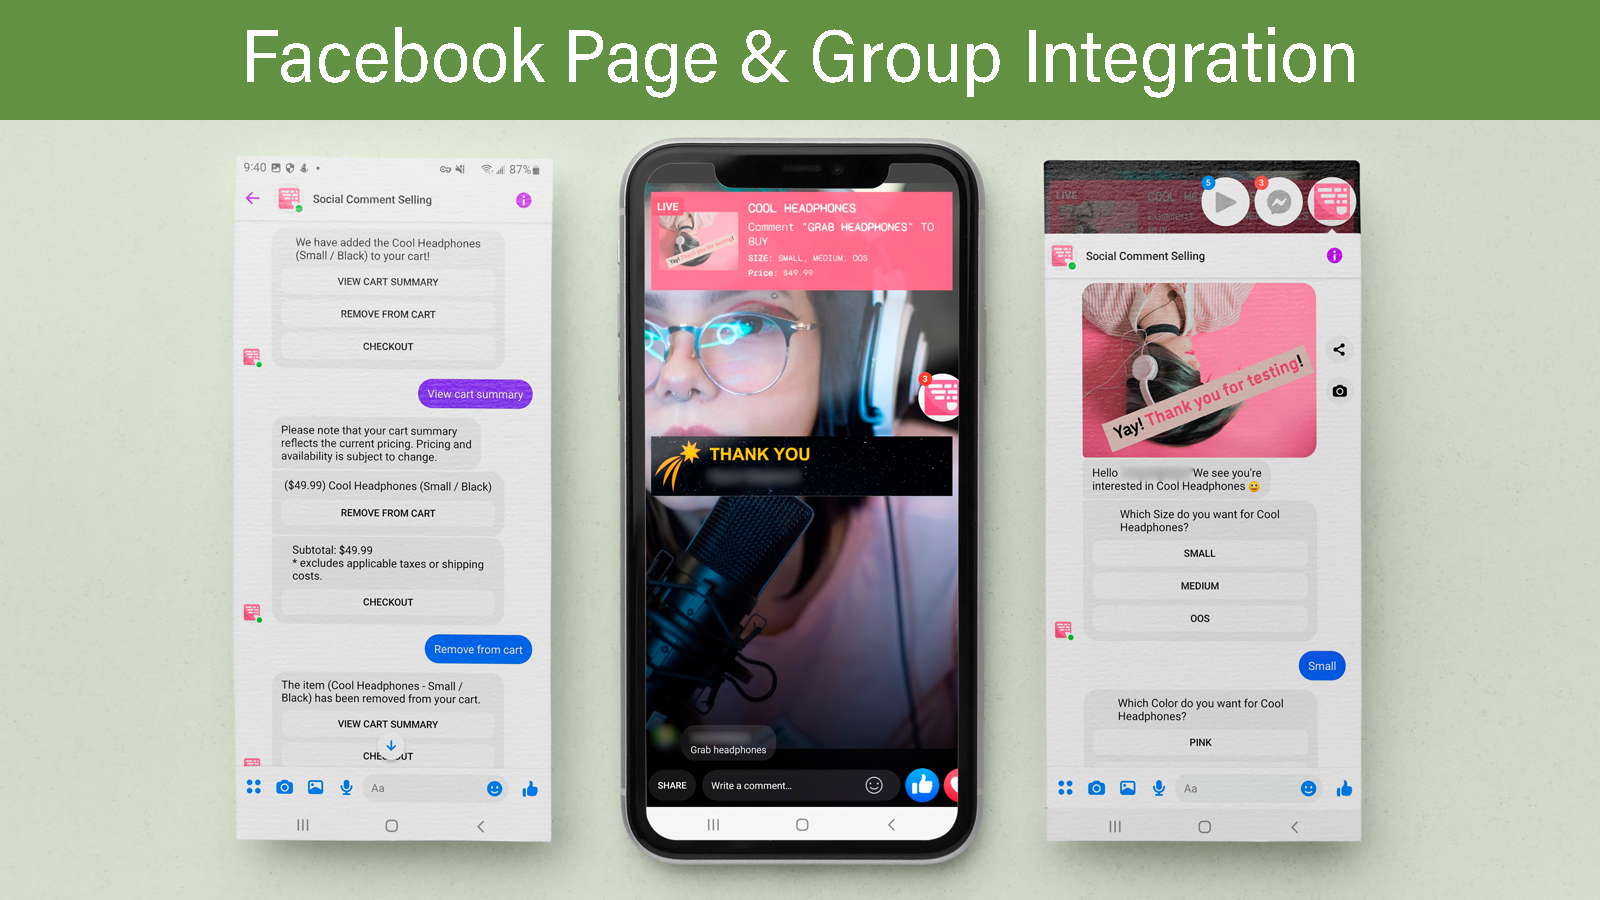 Facebook Page & Group Integration